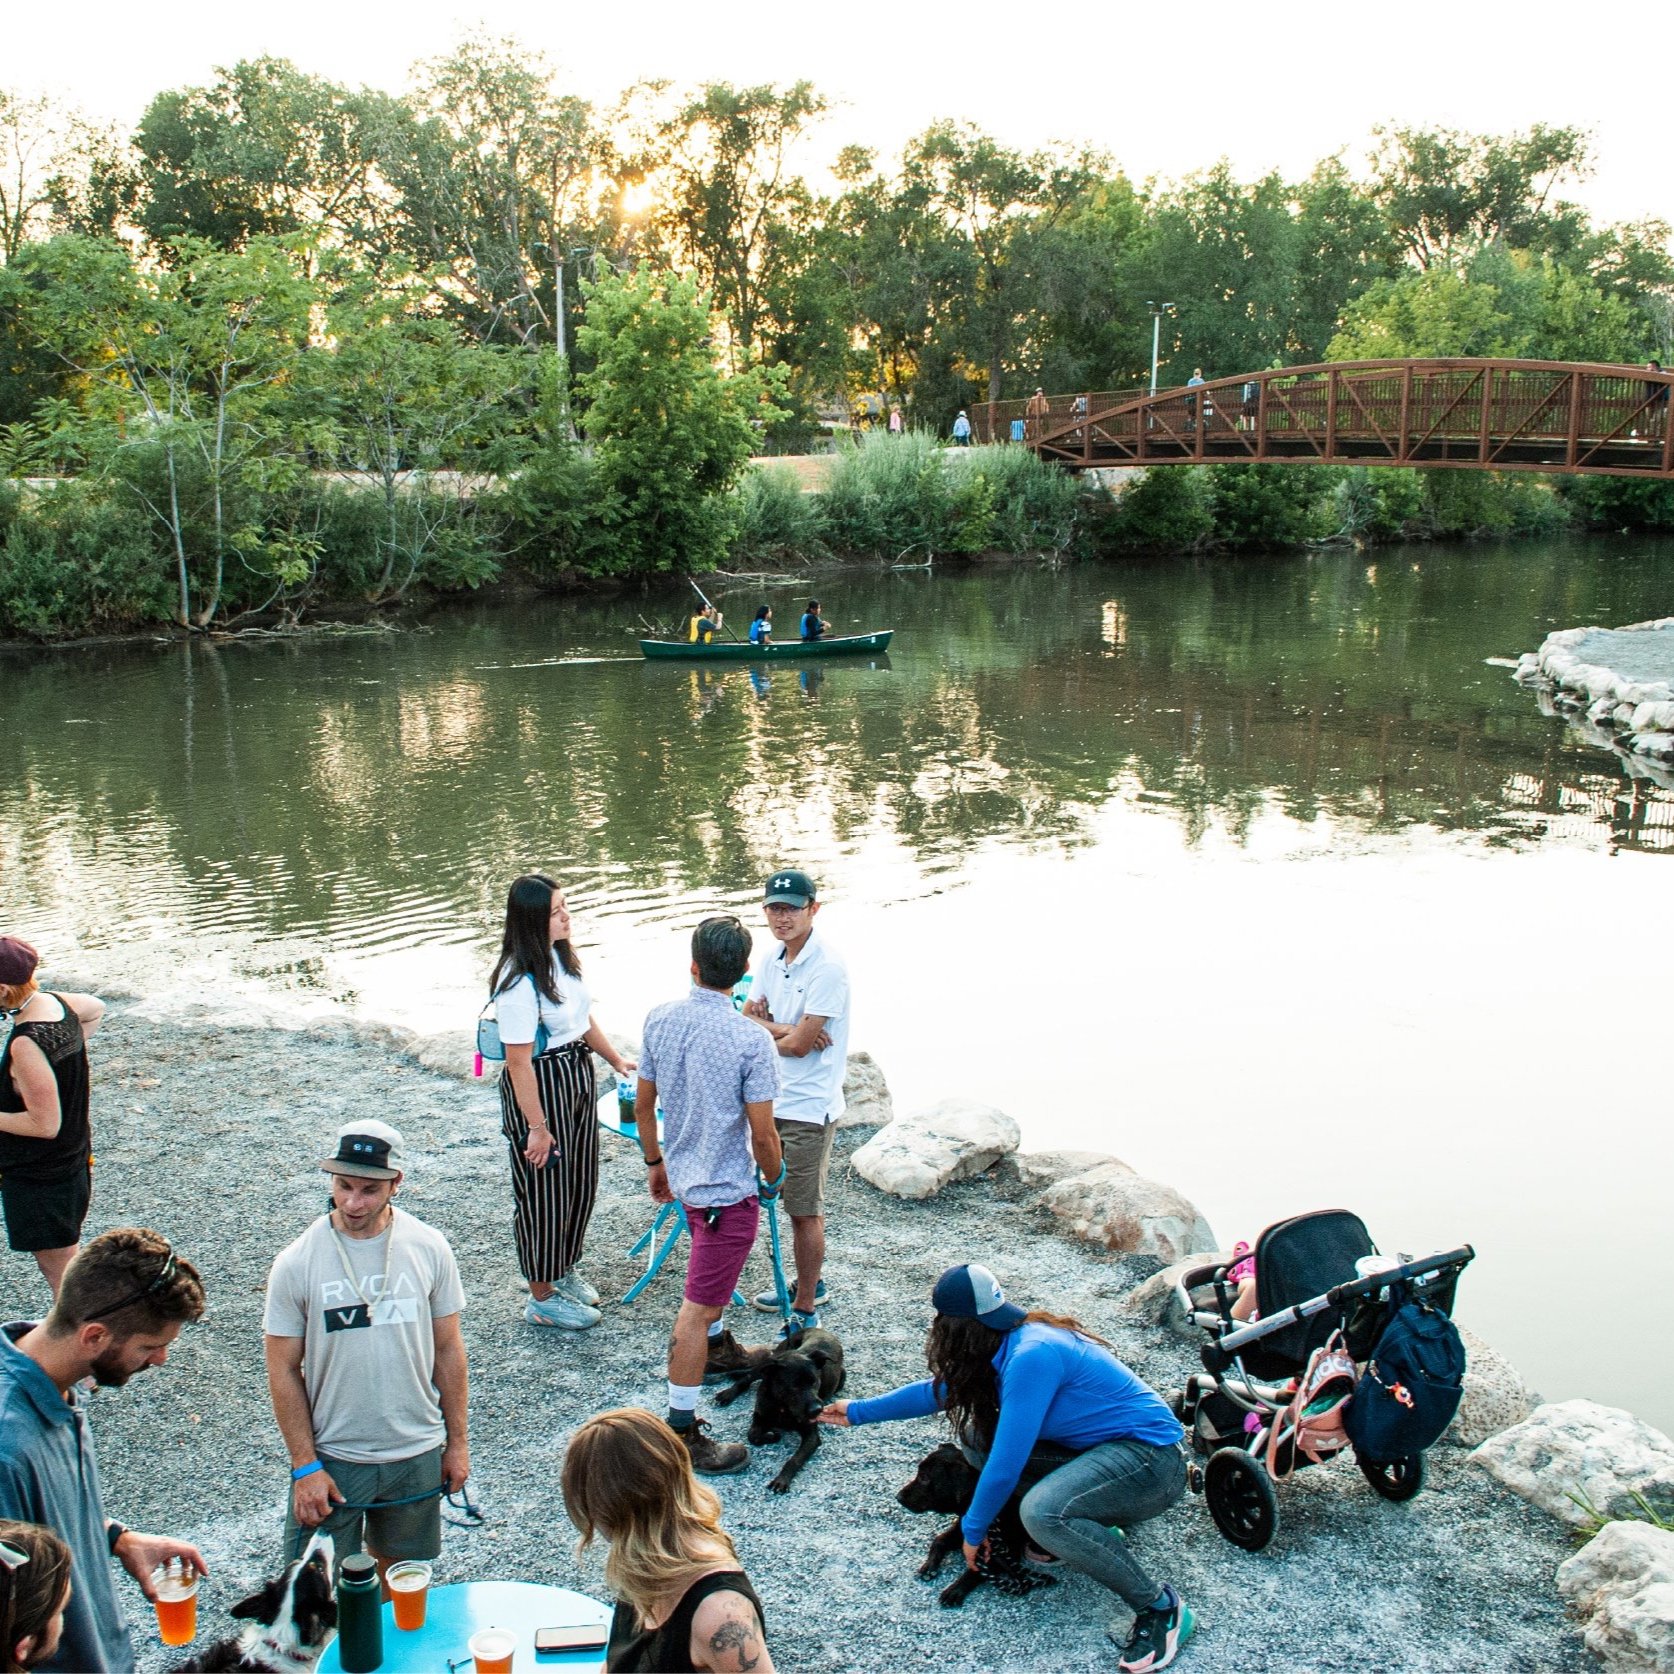 People+and+Canoes+at+the+Three+Creeks+Confluence+Beer+Garden+in+Salt+Lake+City.jpg